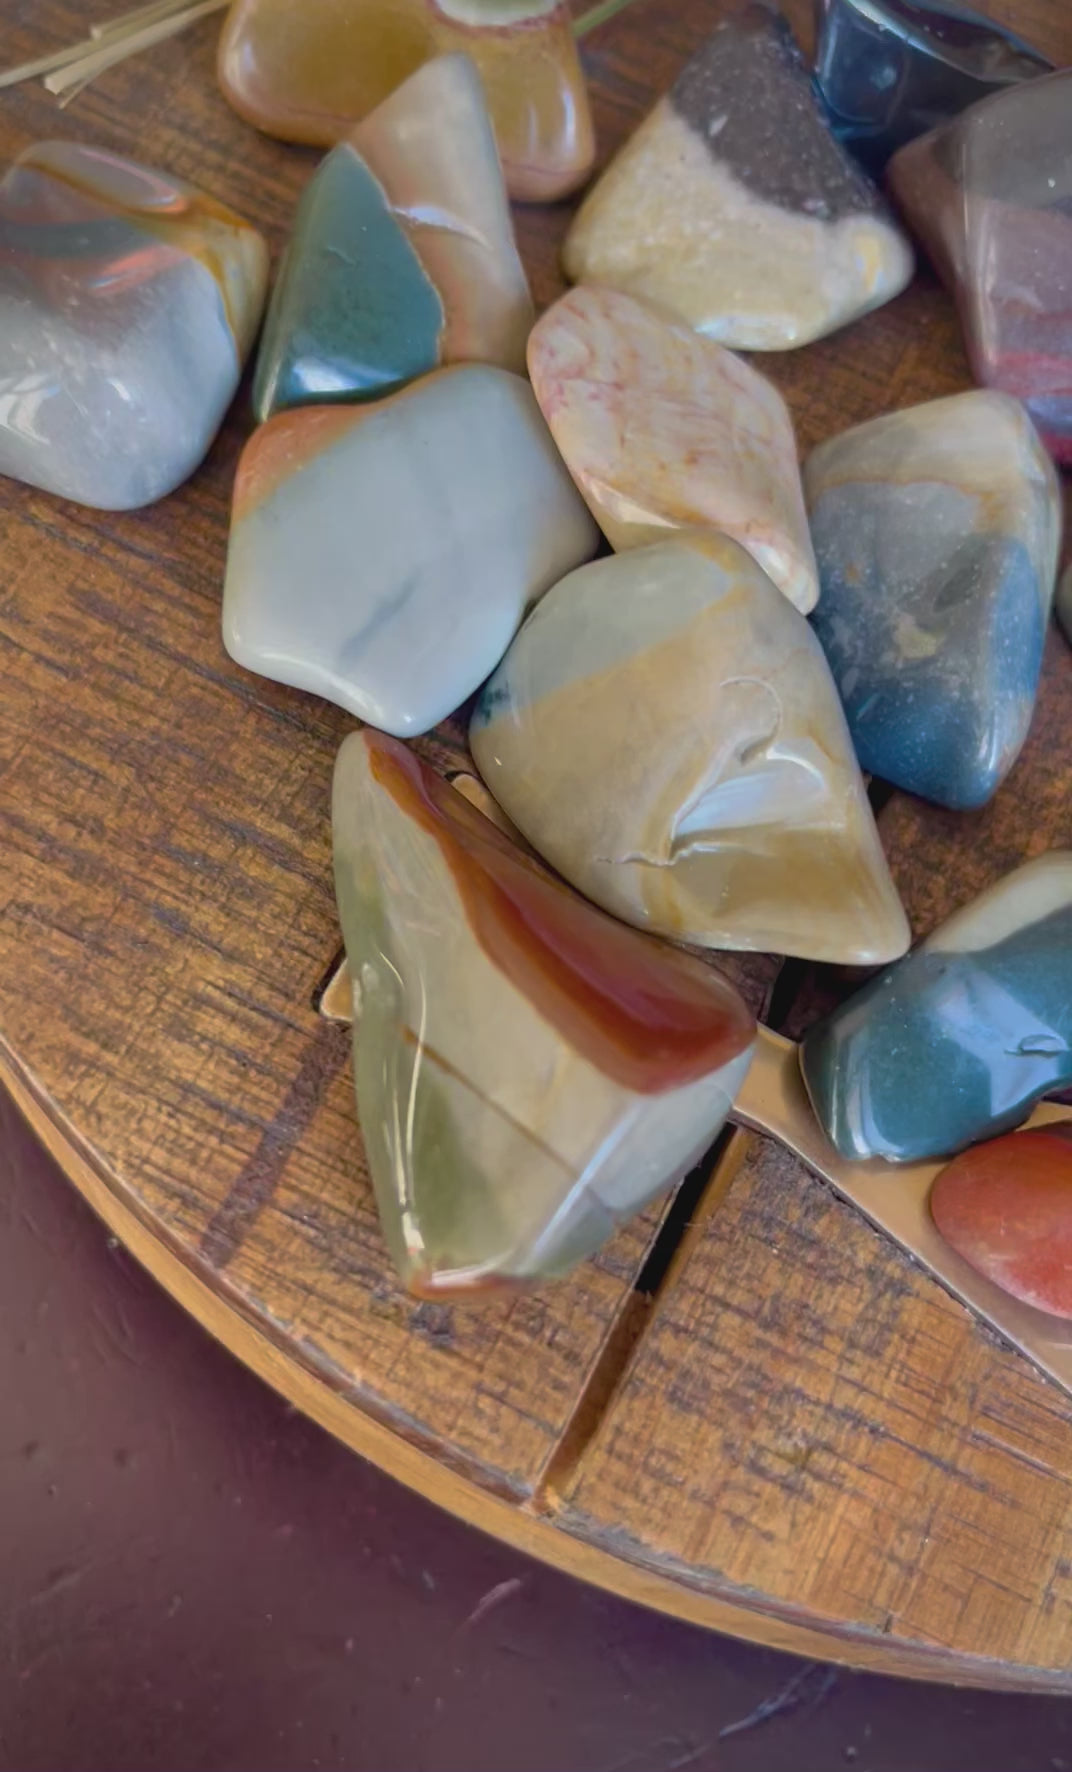 Up close look at Tumbled polychrome jasper (desert jasper) laid out on a wooden surface.